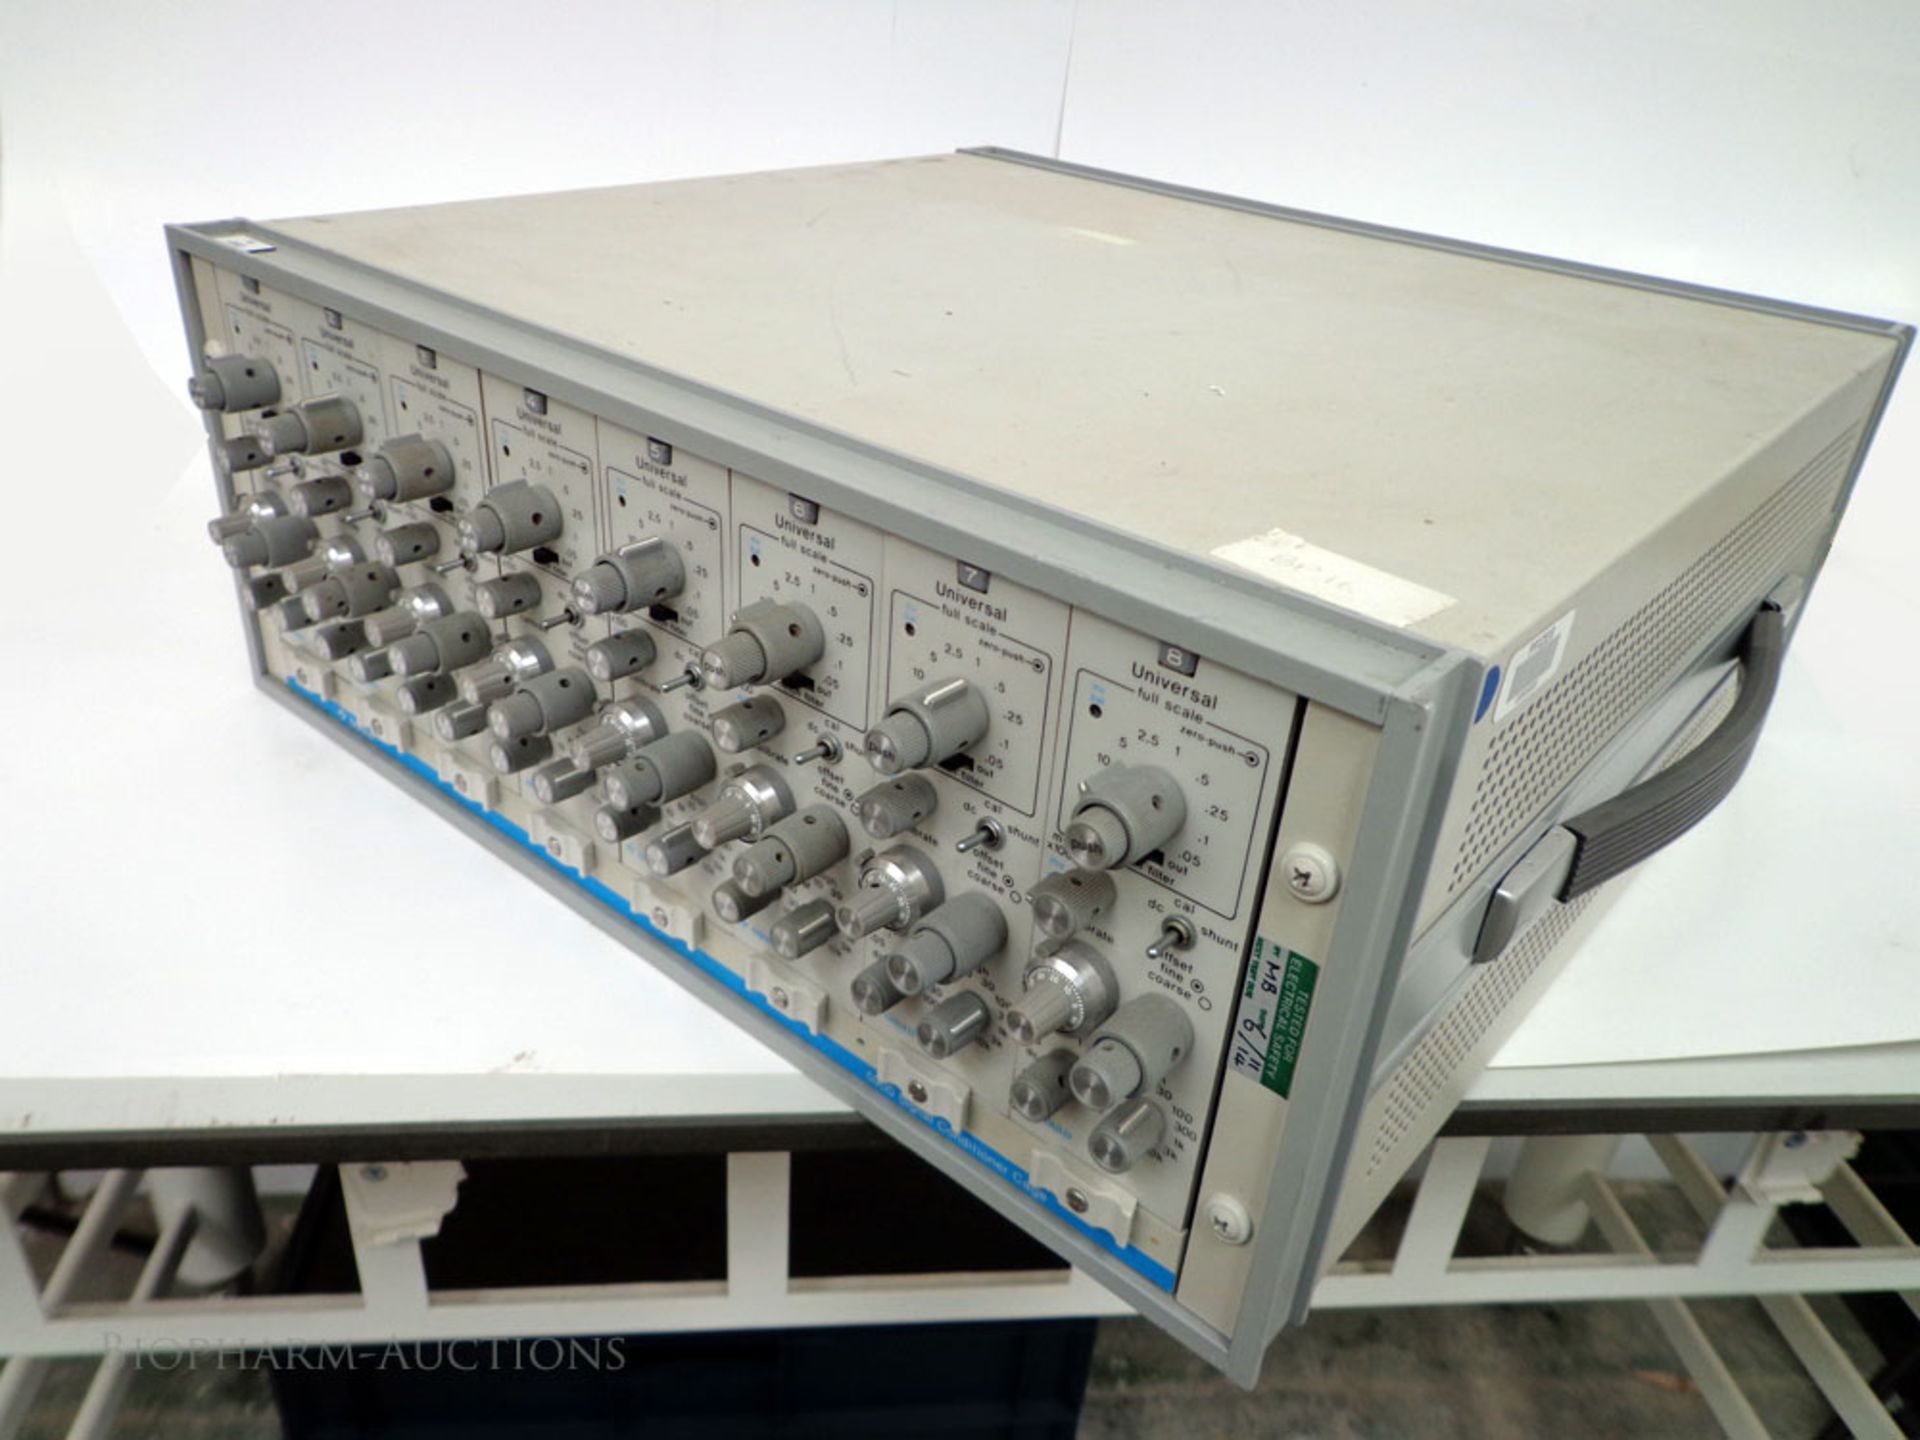 GOULD 5900 Signal Conditioner CageCL-810231-01, S/N 1040.